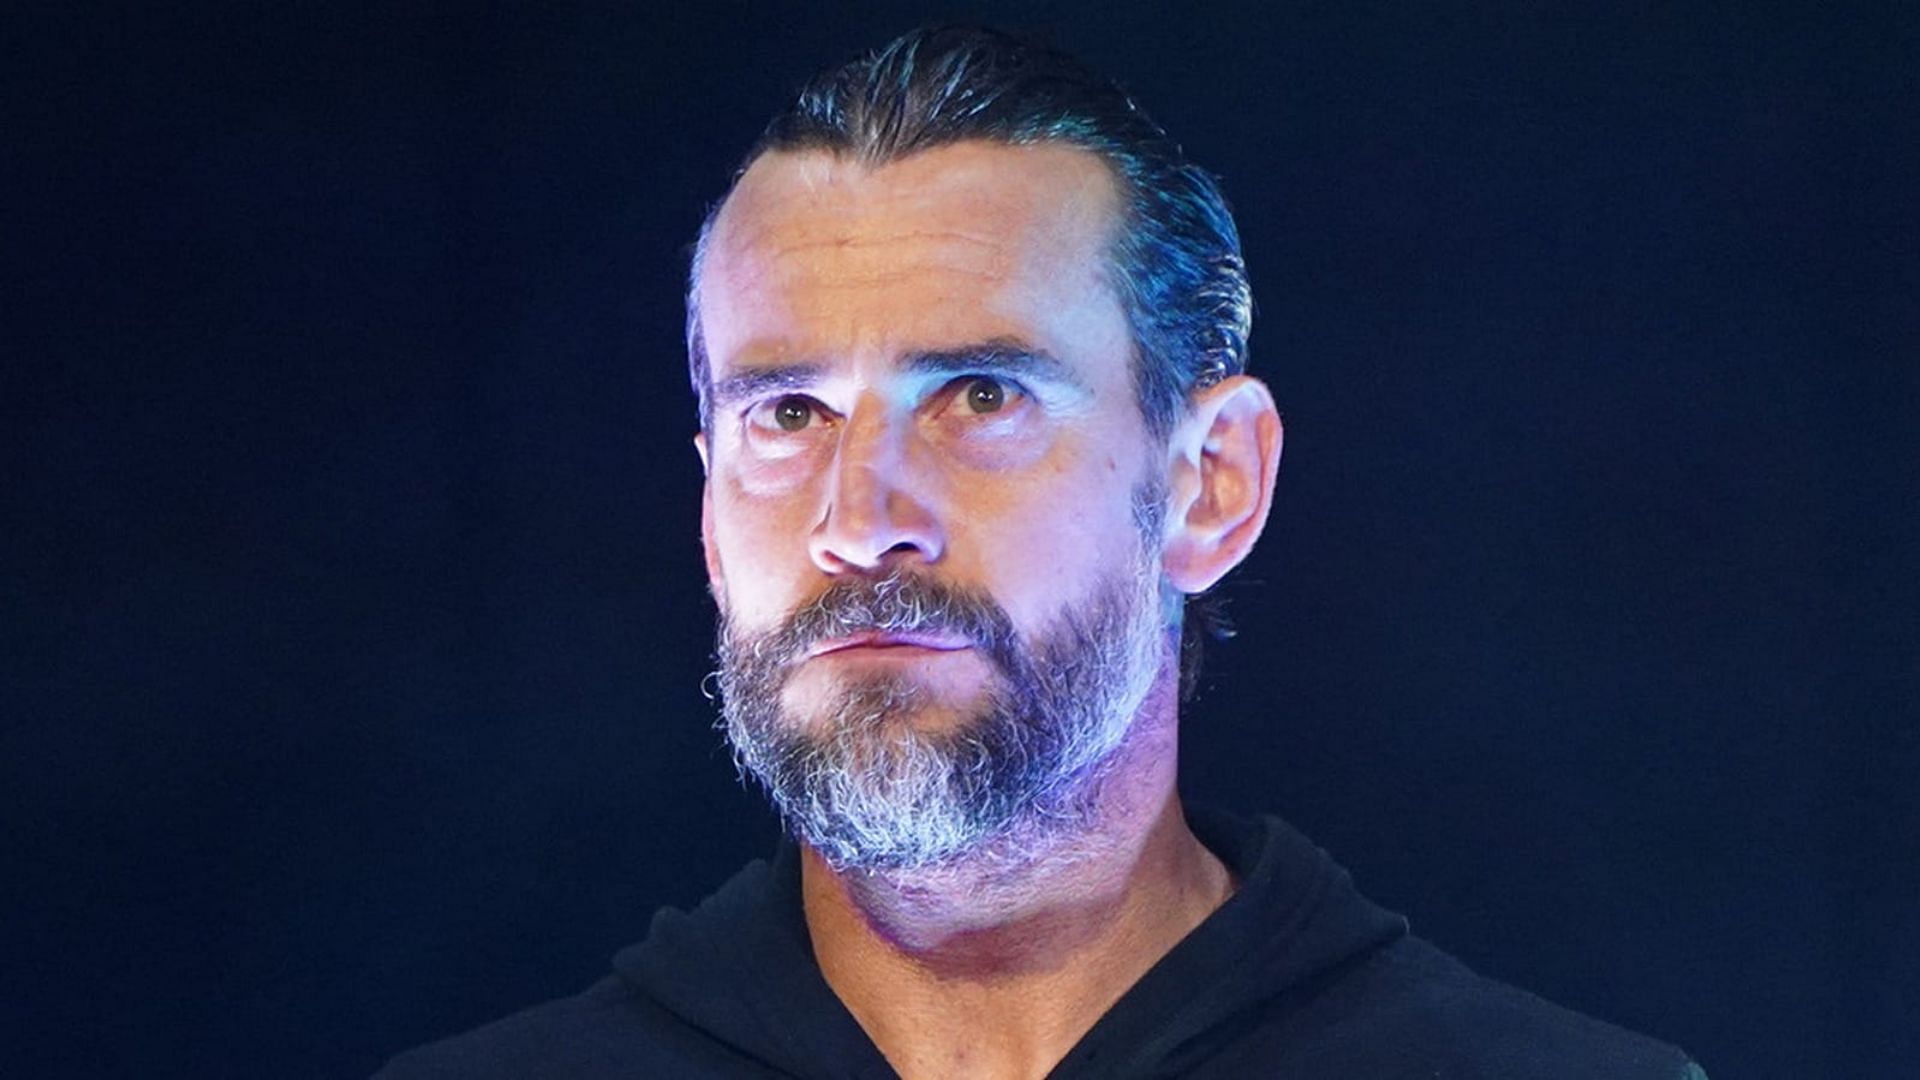 Who could return to AEW with CM Punk?